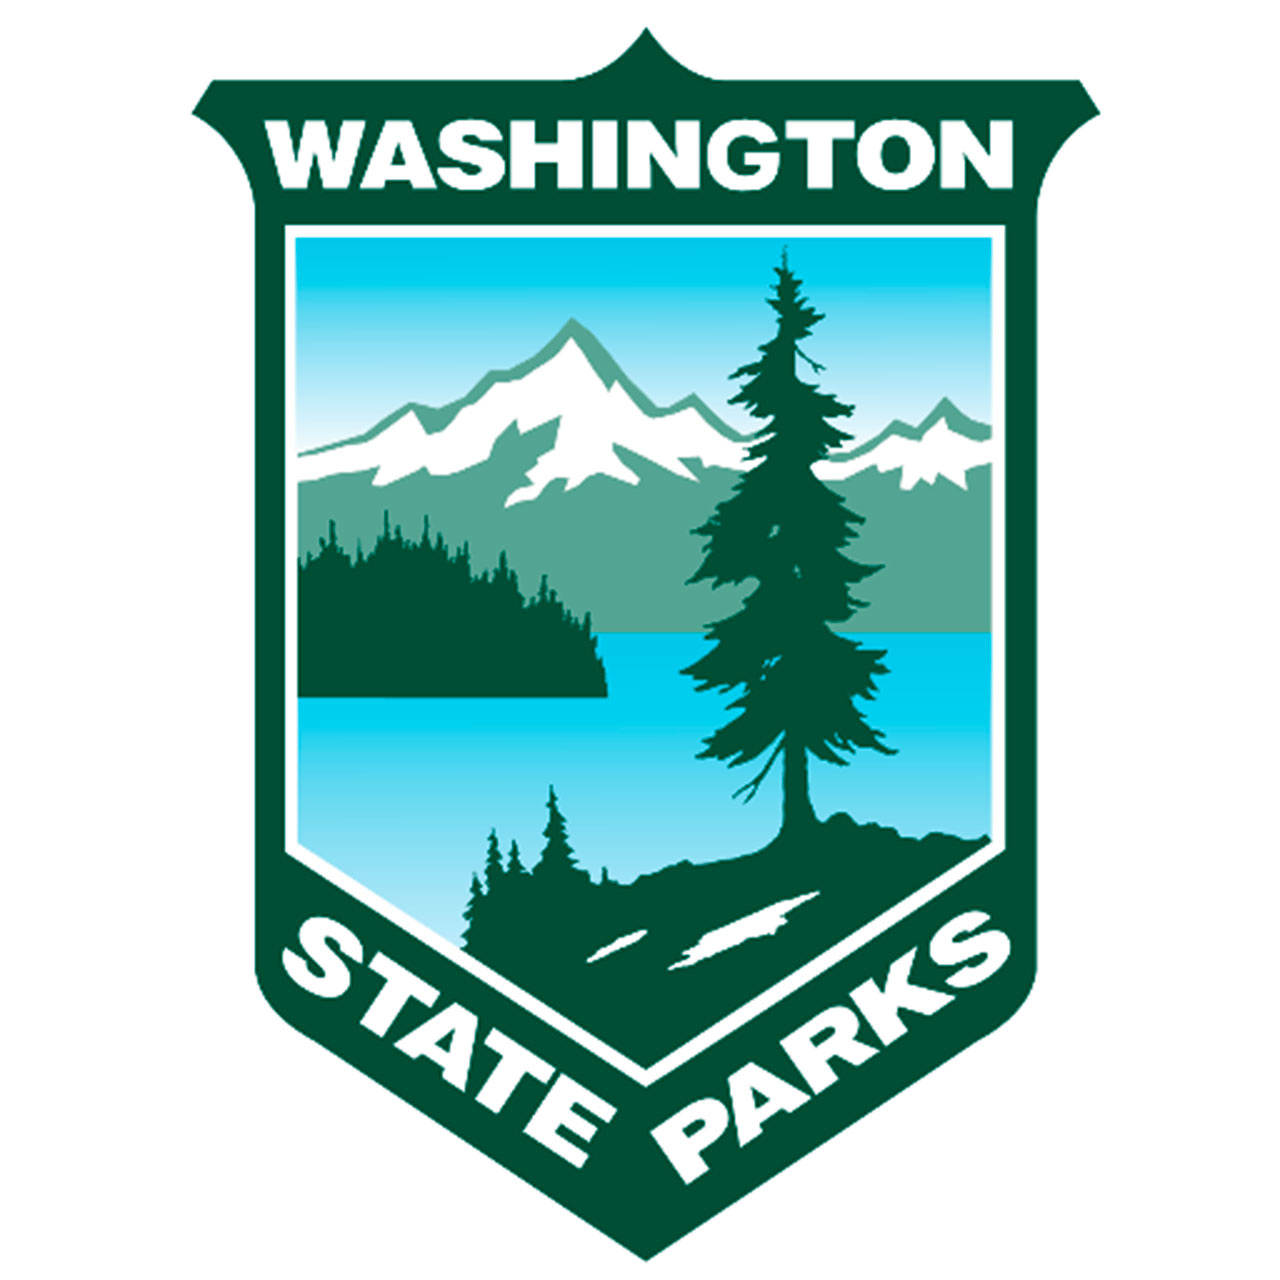 State park ‘free day’ is Aug. 25